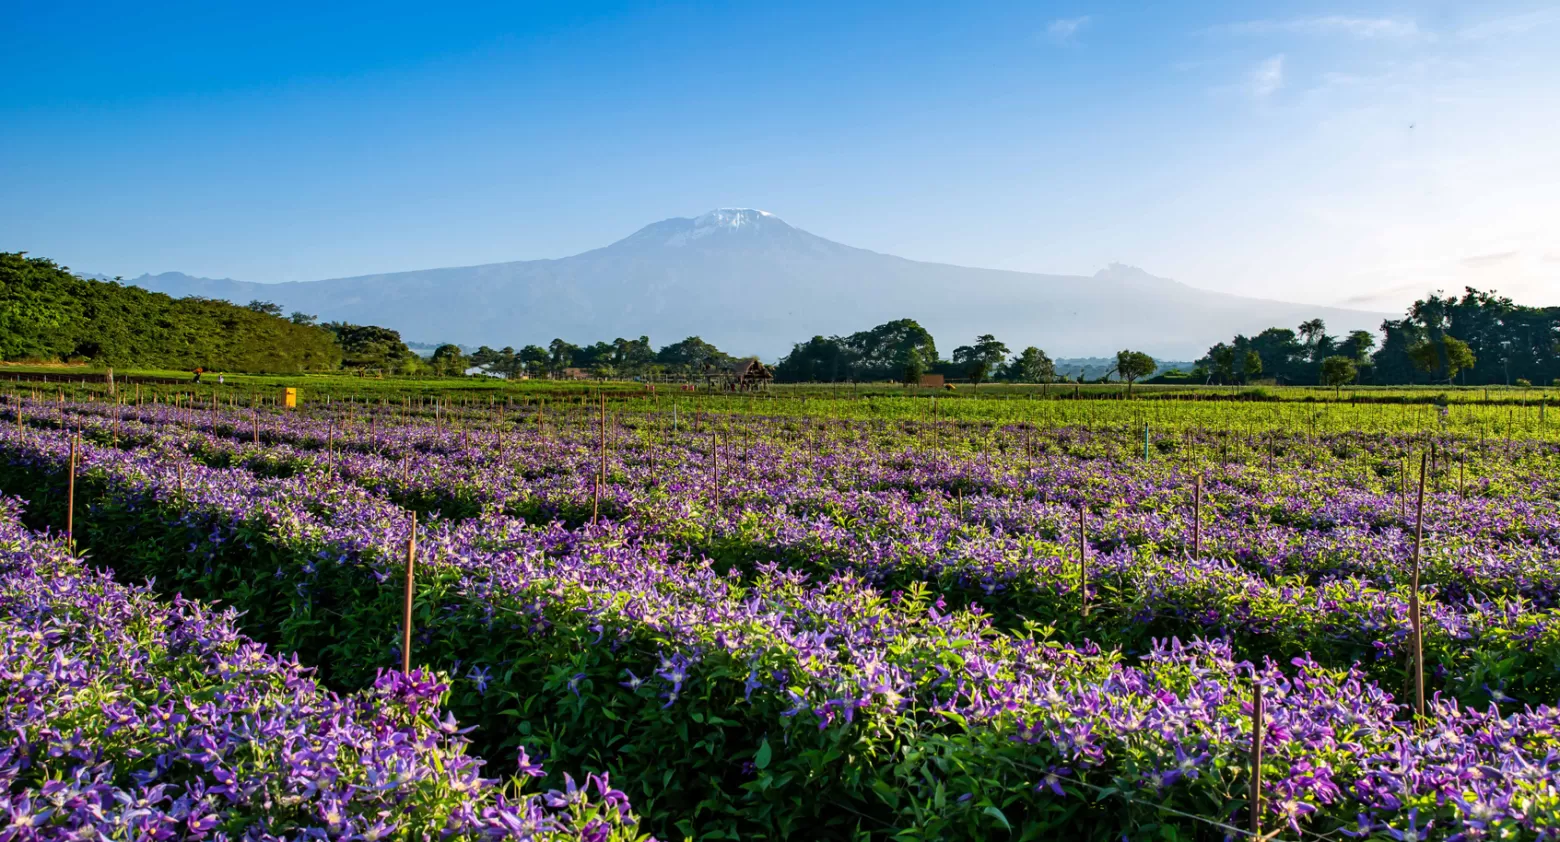 Clematis Amazing® flower field in Tanzania with Kilimanjaro in the background